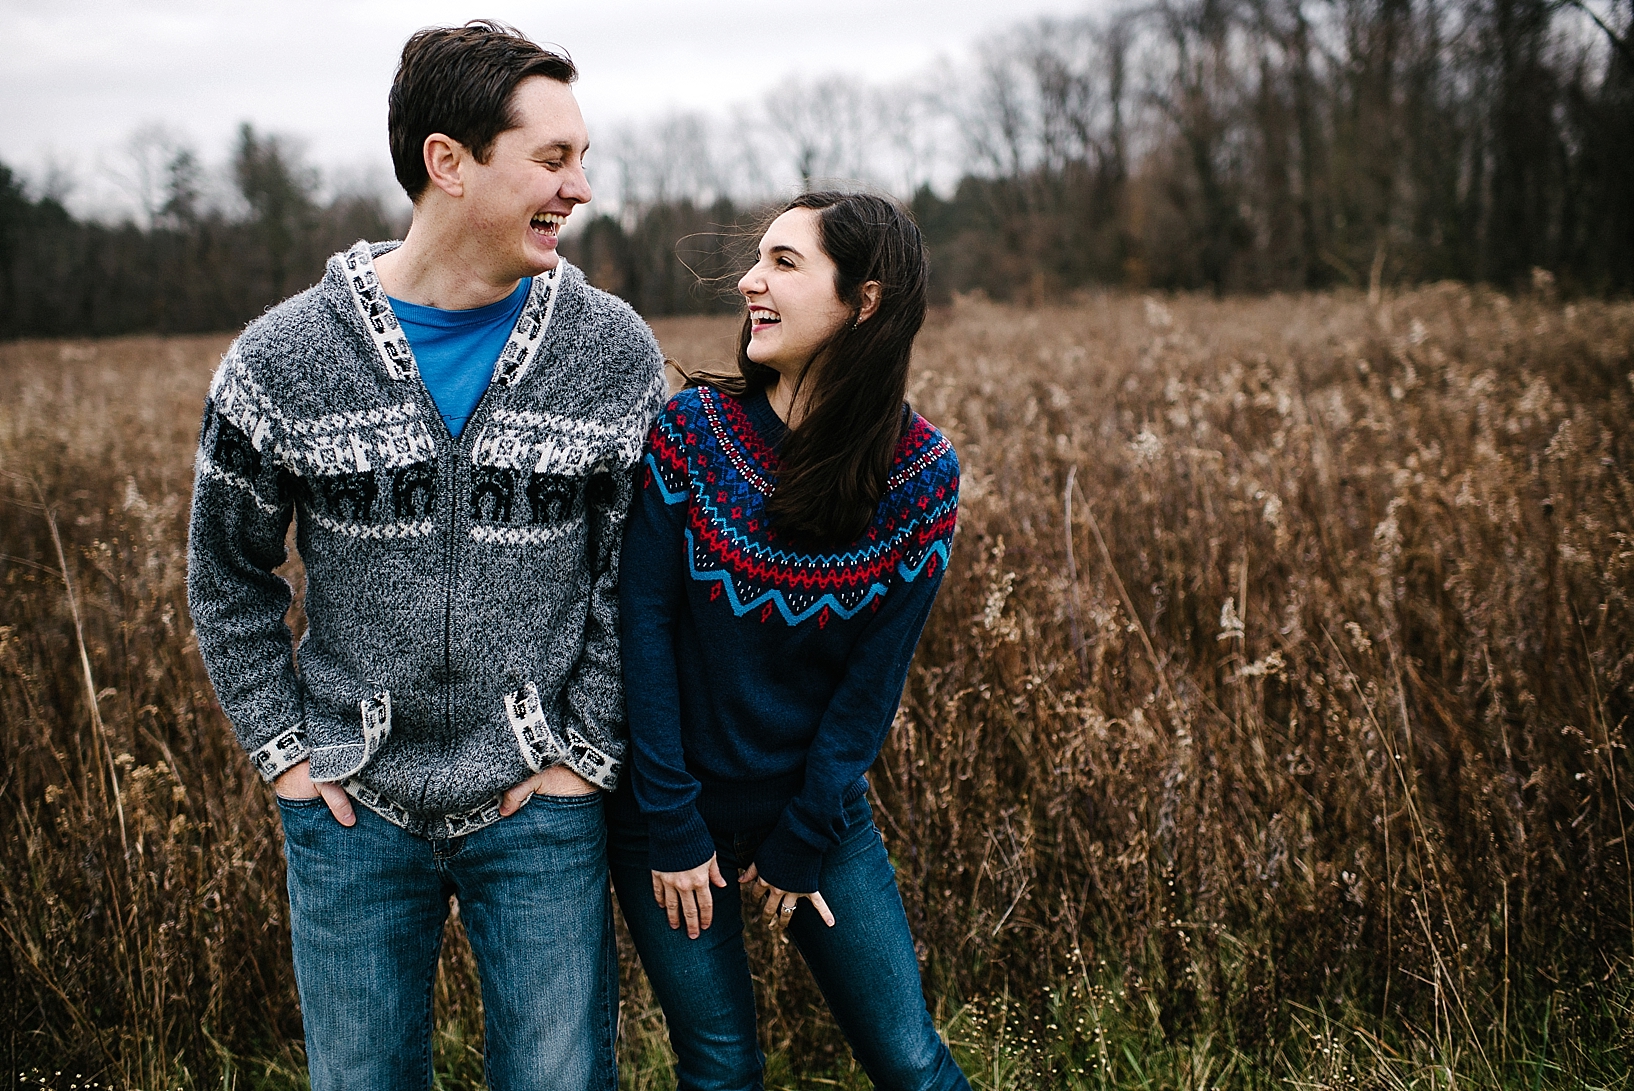 guy in grey sweater and girl in blue sweater standing in field laughing